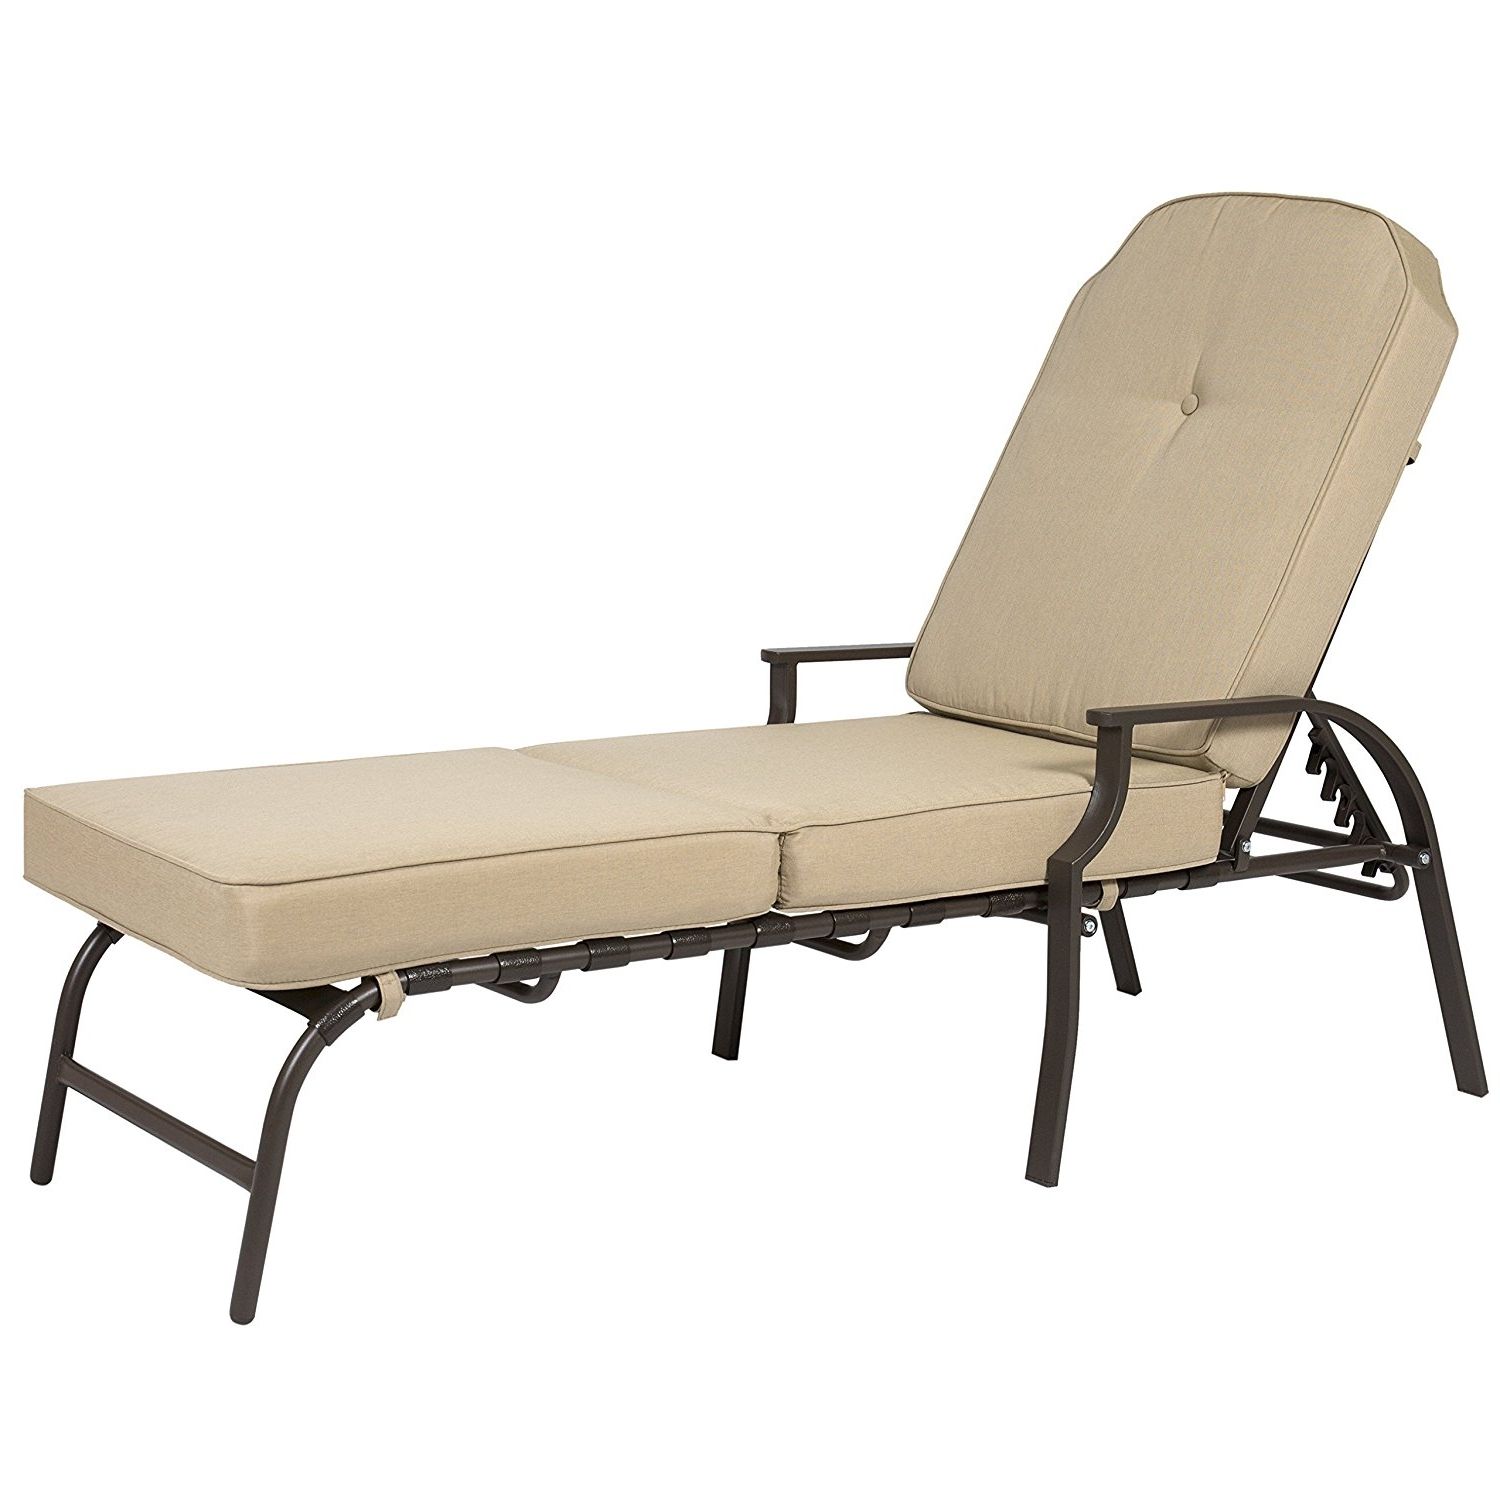 Favorite Amazon : Best Choice Products Outdoor Chaise Lounge Chair W In Pool Chaise Lounge Chairs (View 8 of 15)